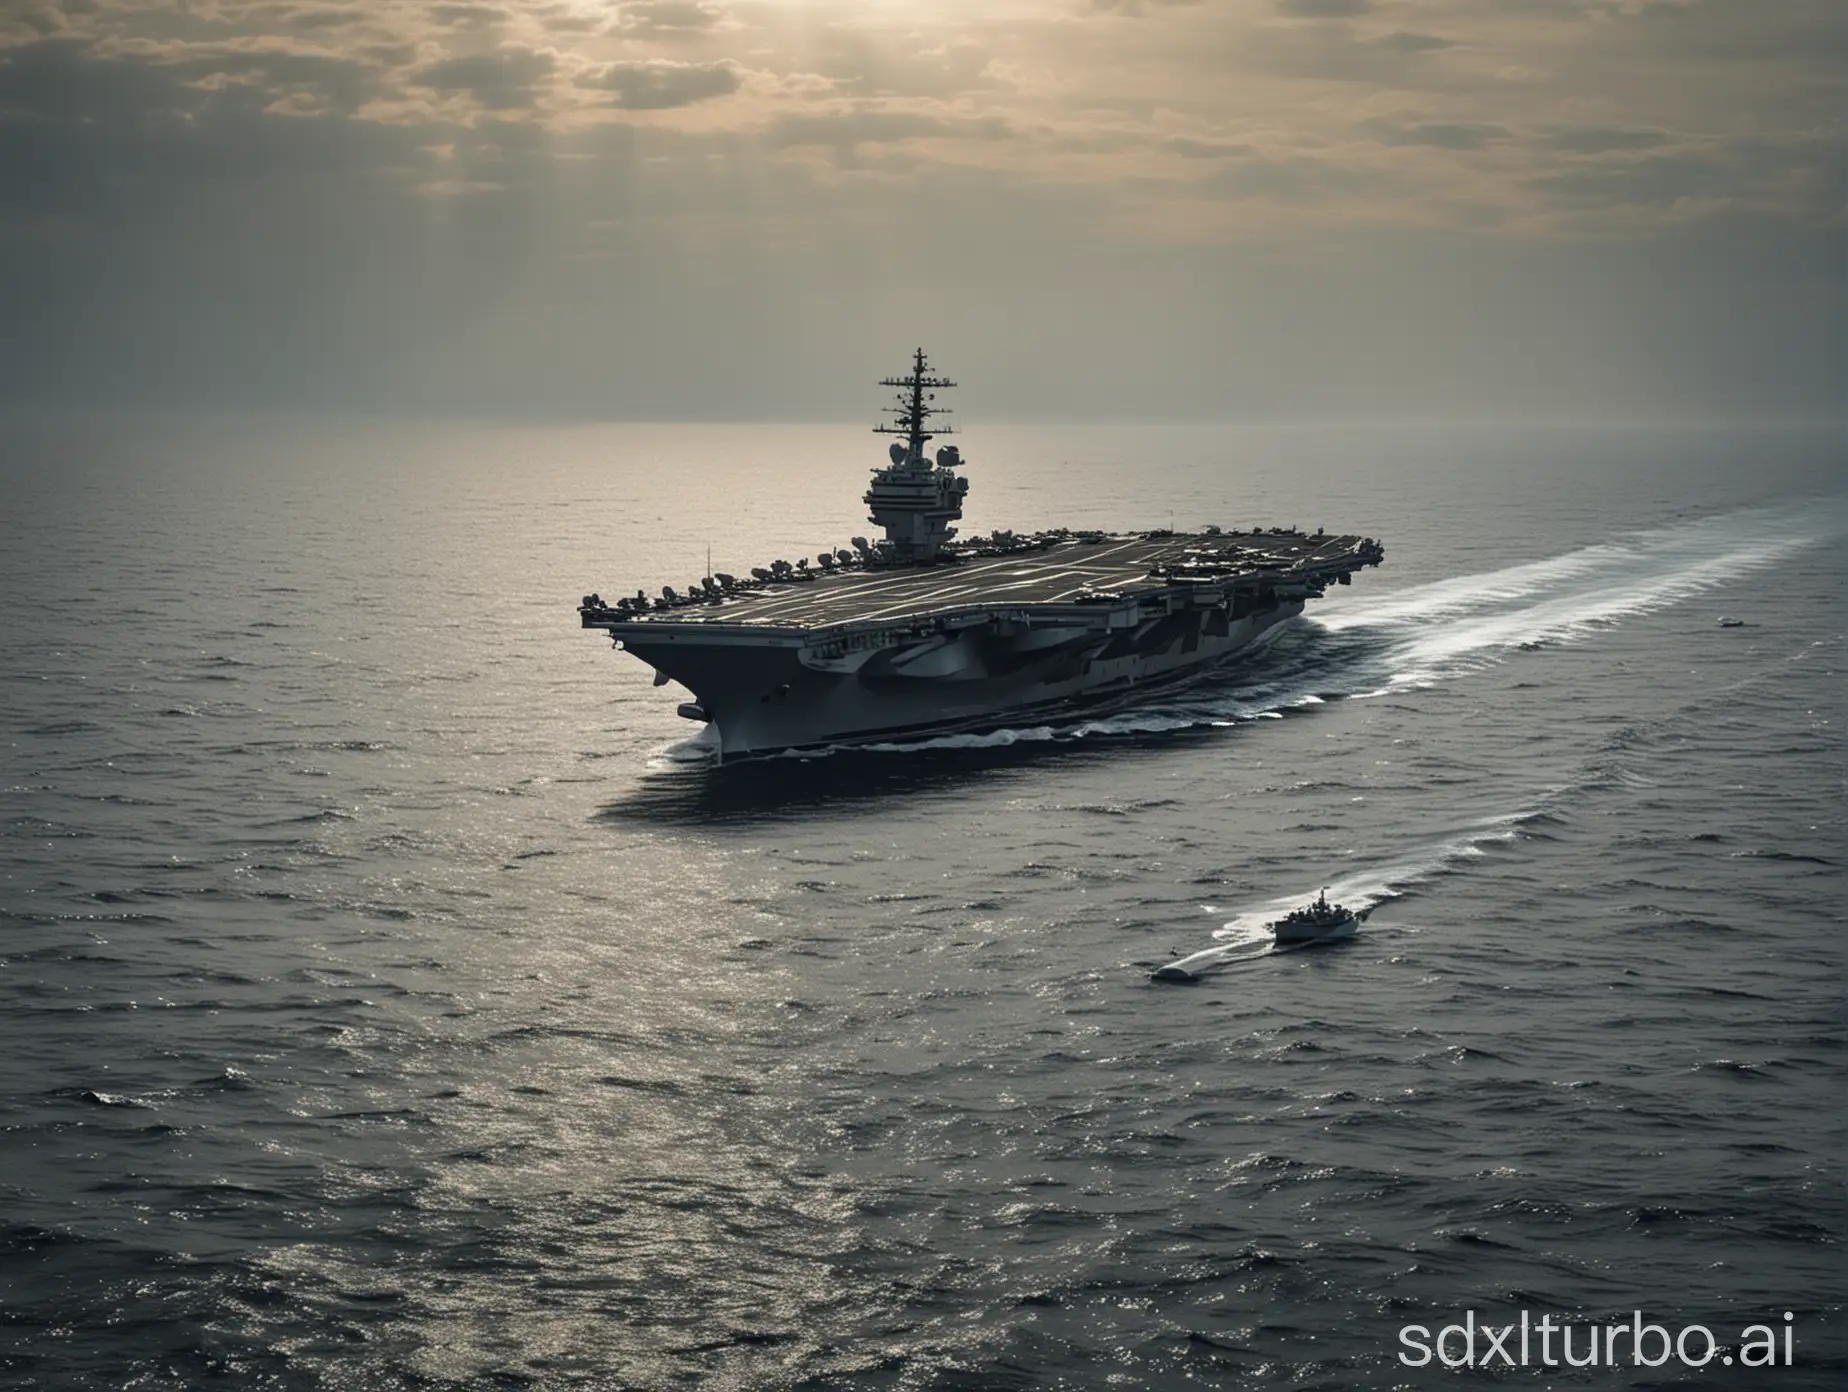 aircraft carrier sailing on the vast sea